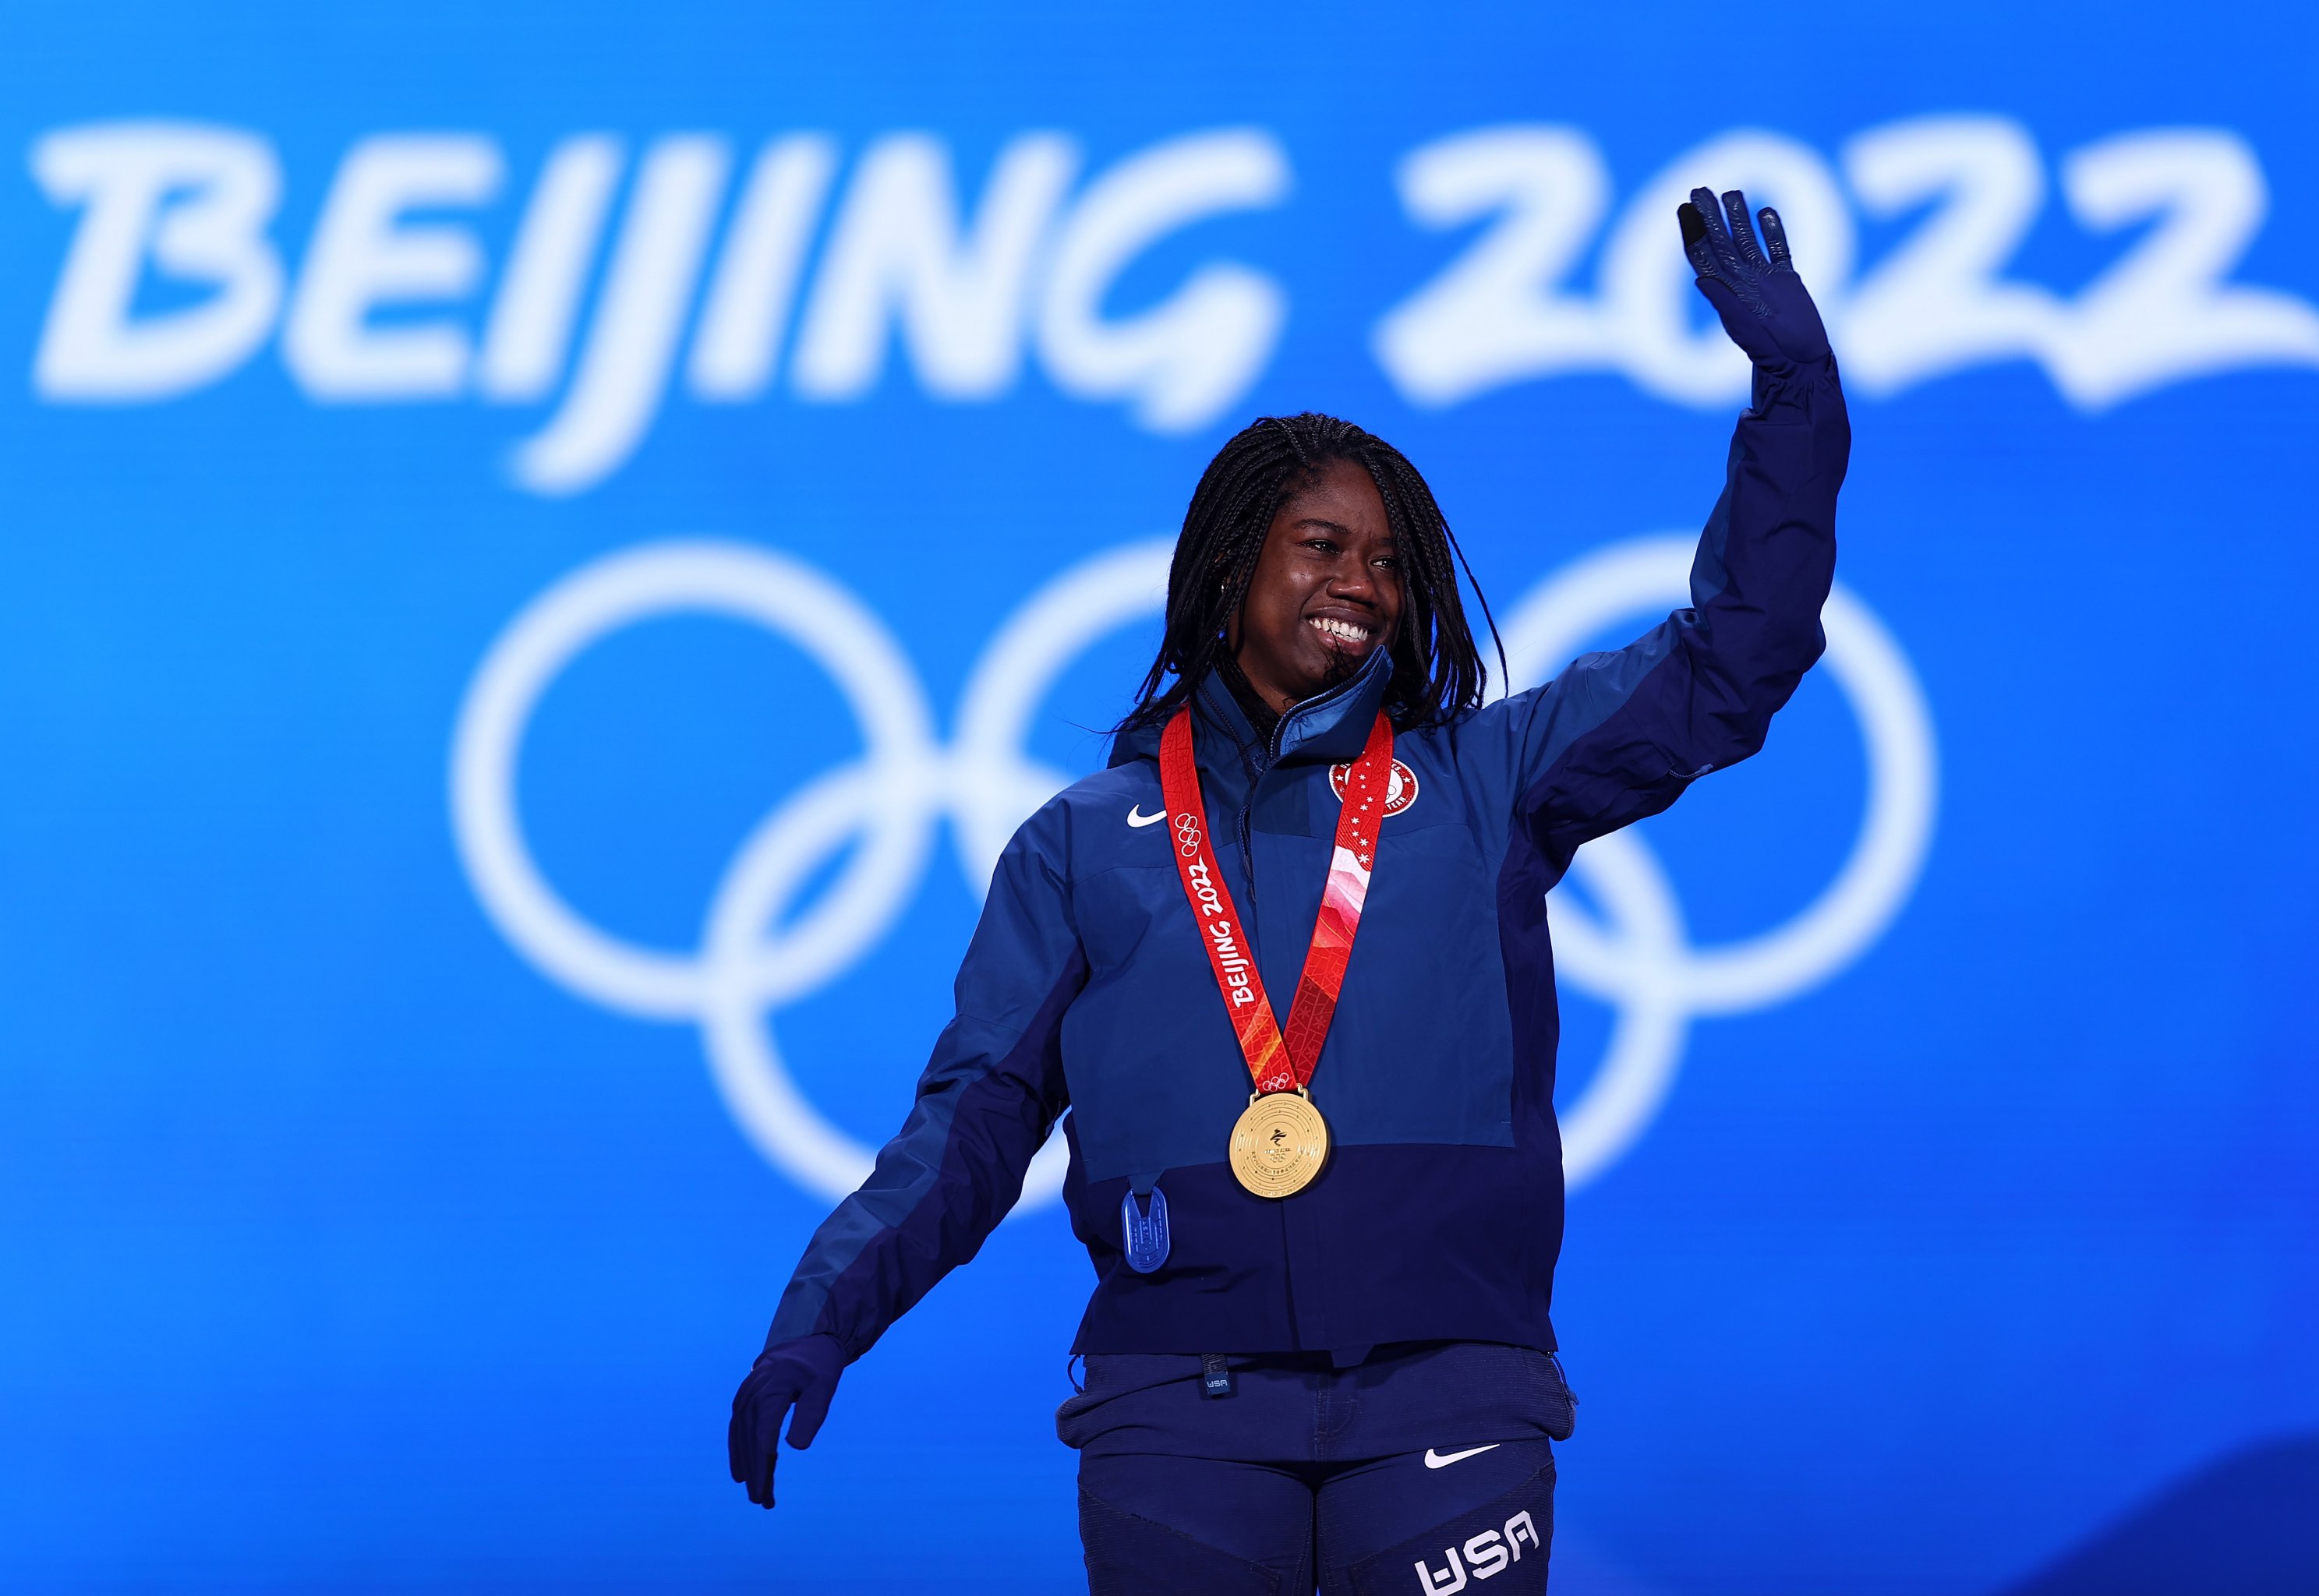 Who Has Won The Most Medals In A Single Olympic Games?, by Sylvia Powell